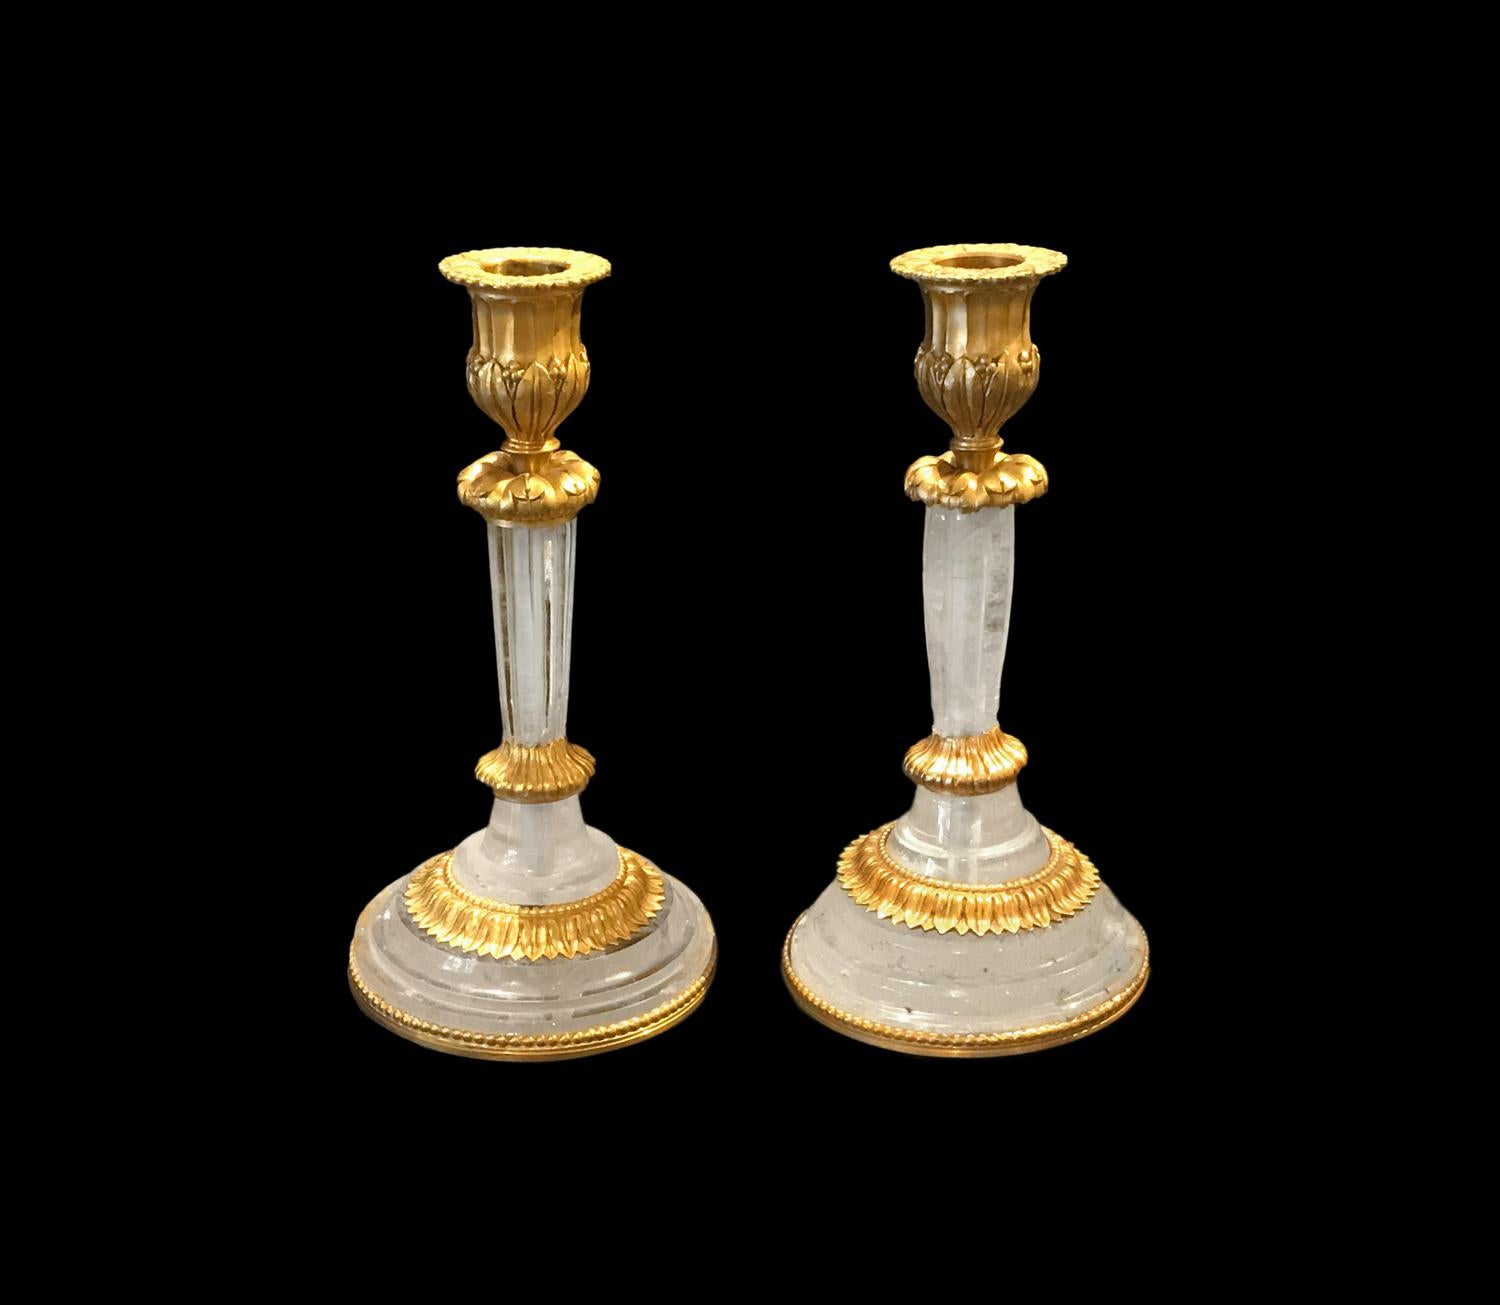 Pair of rock crystal candlesticks on a Louis XVI style gilt bronze mount. Circular molded base with gilt bronze ornaments such as beads and waterleaves friezes, also visible on the binet.

Very nice craftsmen work, H 20 cm, early 20th century, the